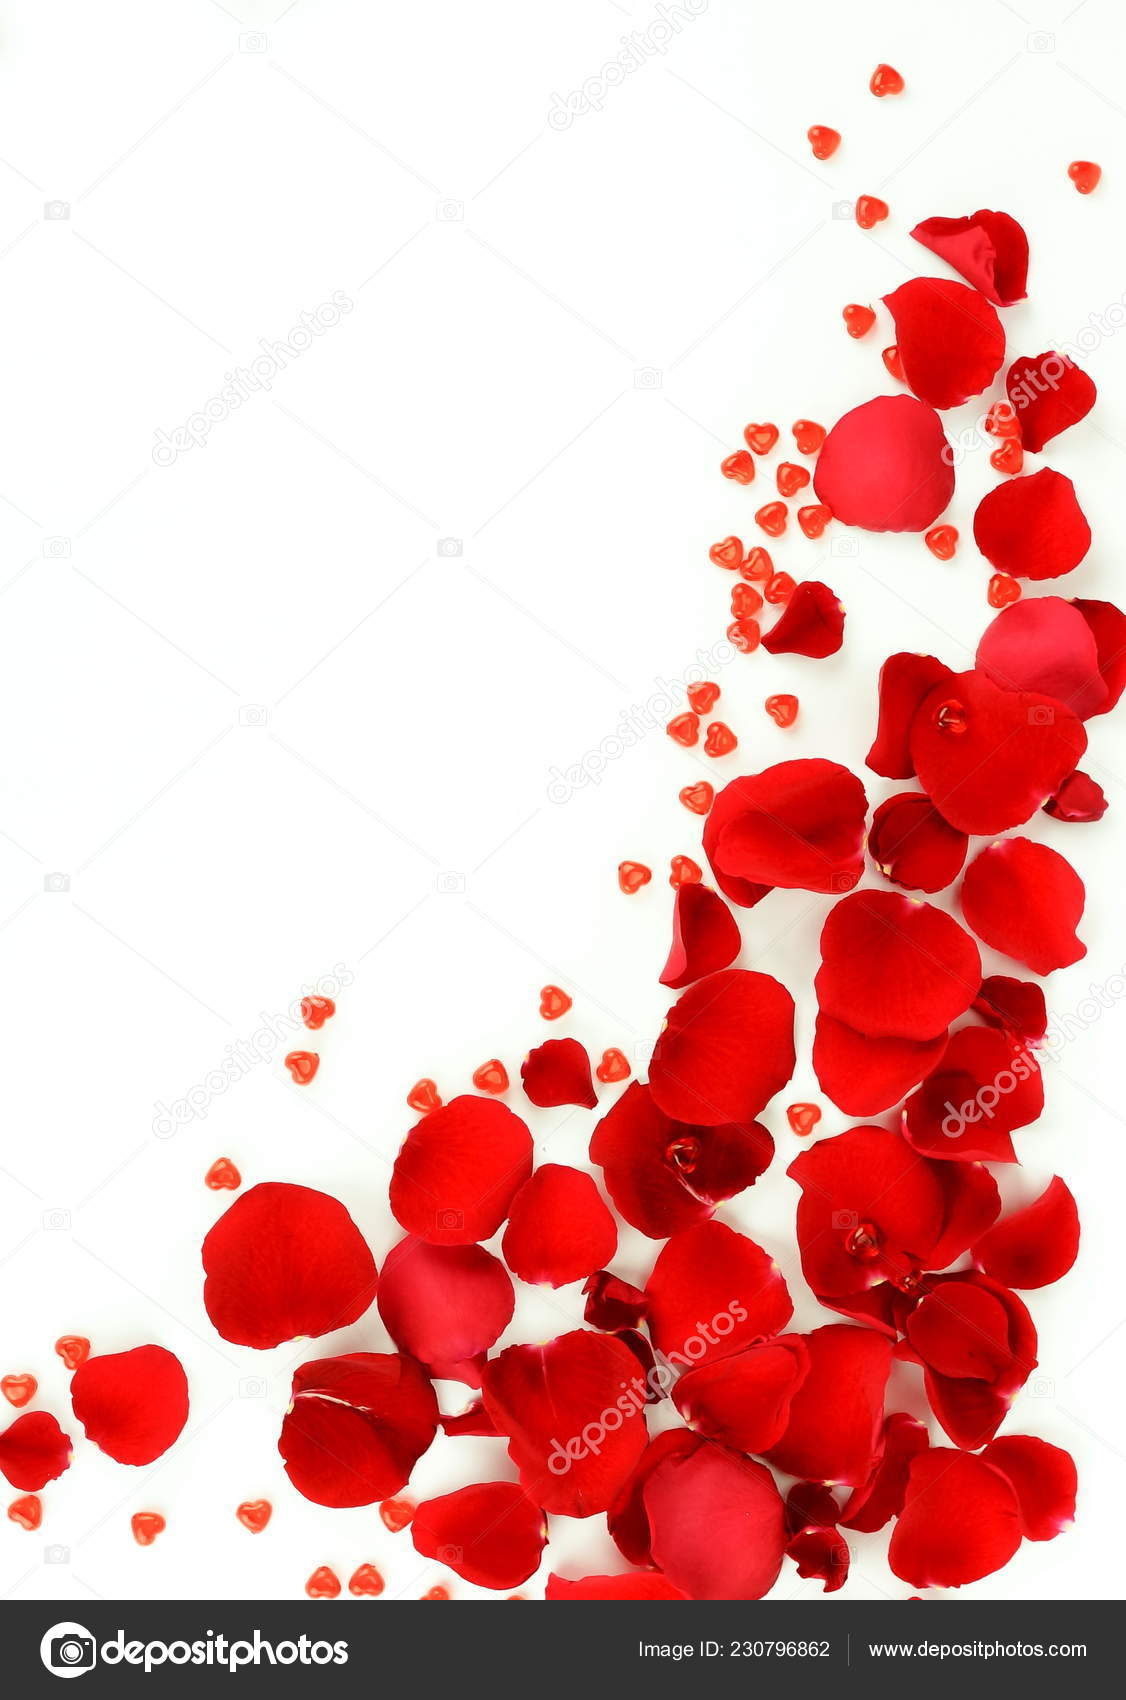 Flowers Background Red Roses Petals Red Small Hearts White Background Stock  Photo by ©Si-27star 230796862